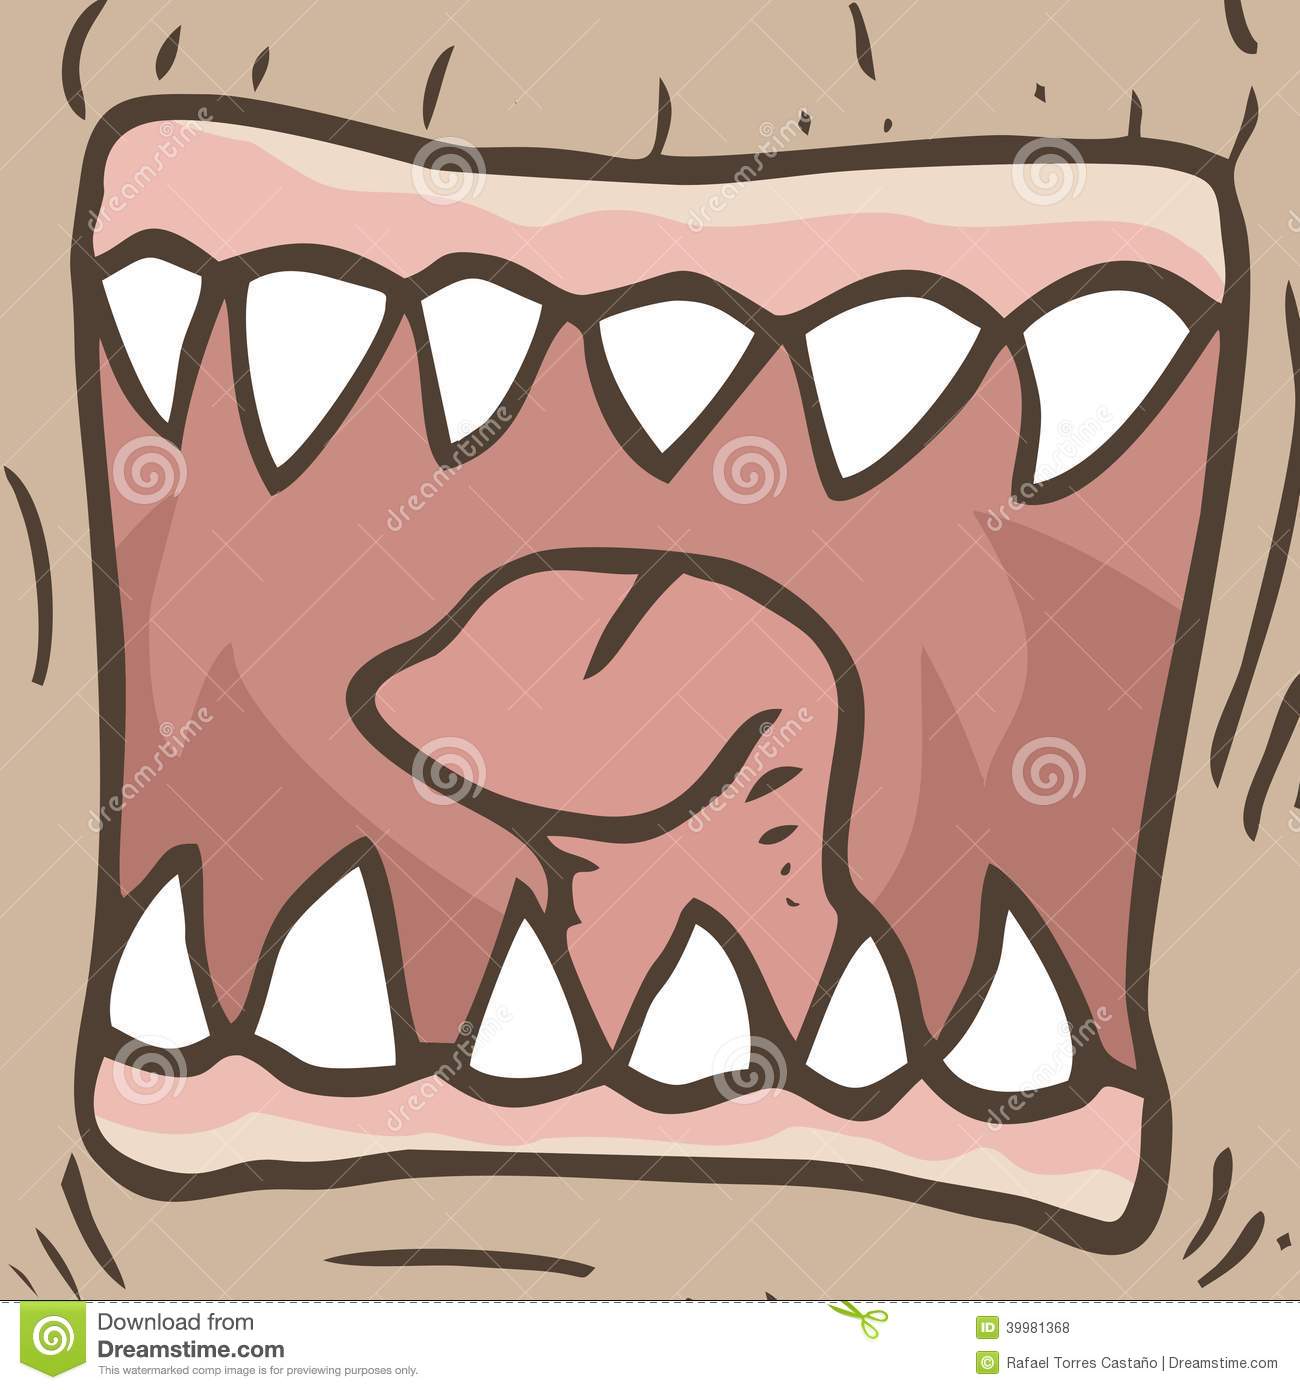 Monster Mouth Stock Vector   Image  39981368